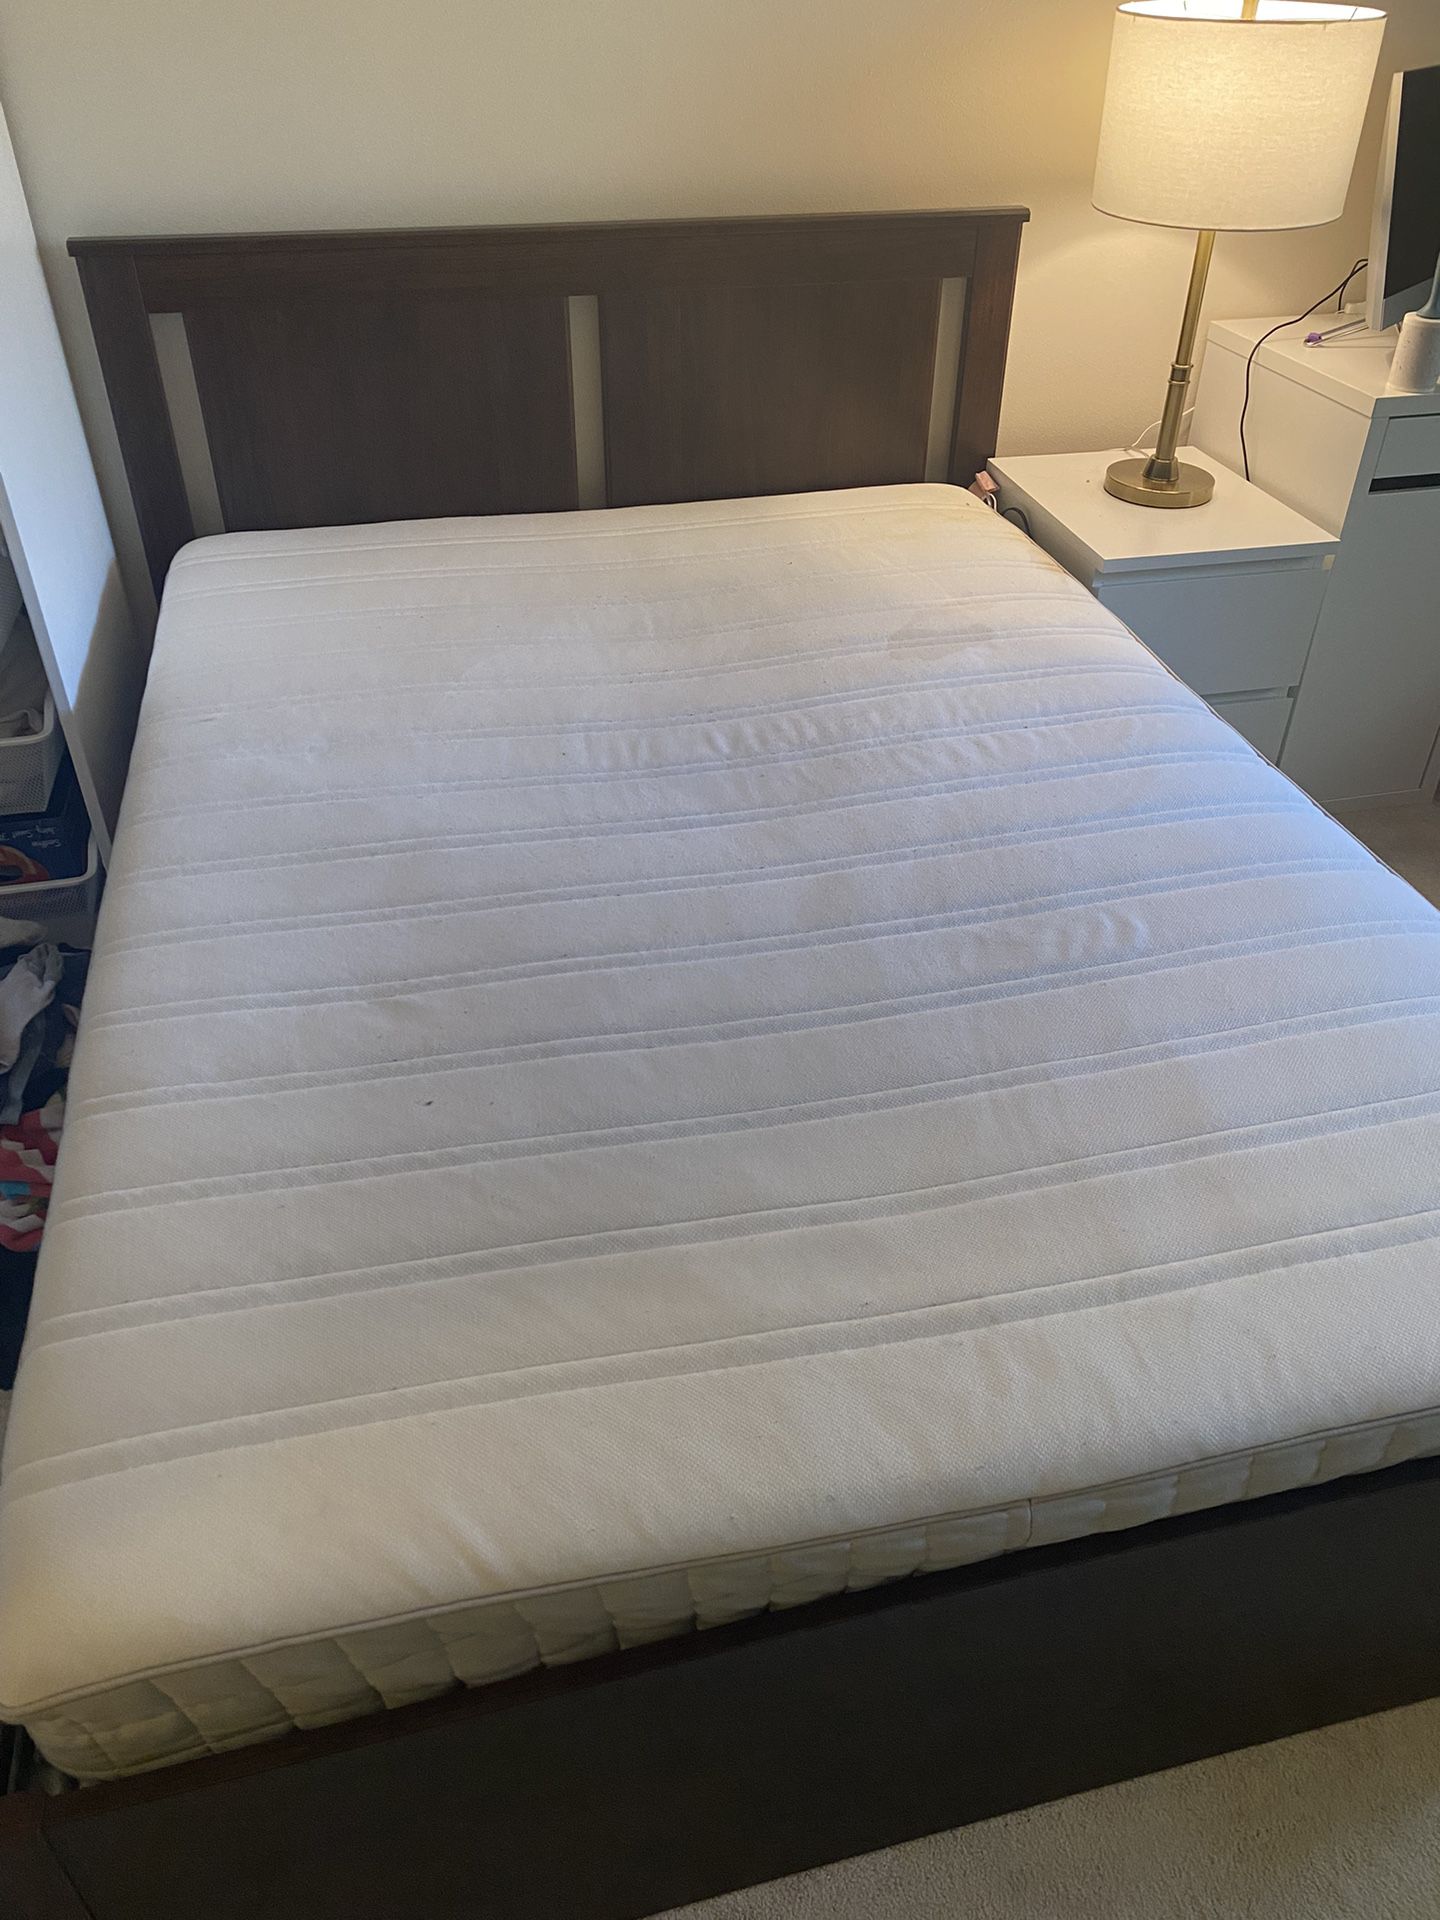 Ikea Full Size Bed frame And Mattress $100-ready for Pickup 